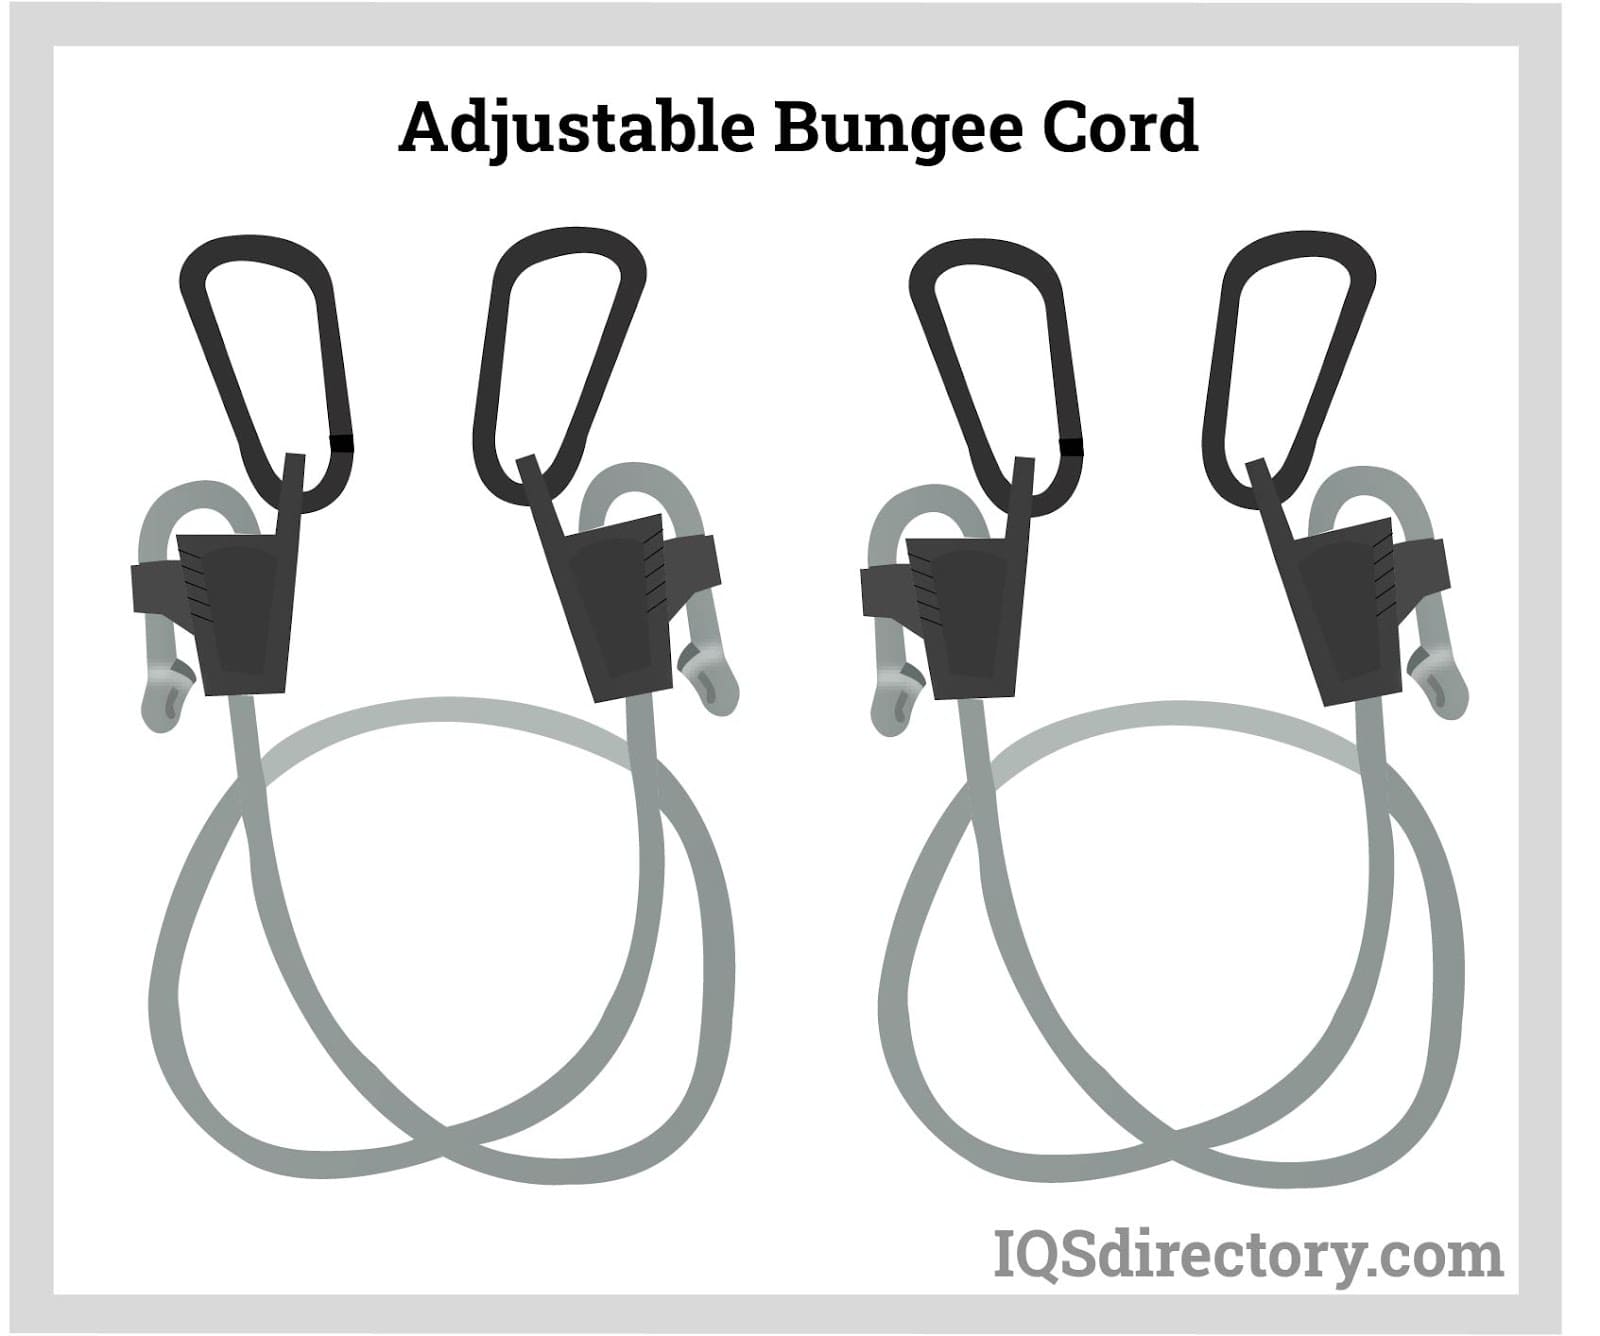 https://www.iqsdirectory.com/articles/rope-supplier/bungee-cord/adjustable-bungee-cord.jpg